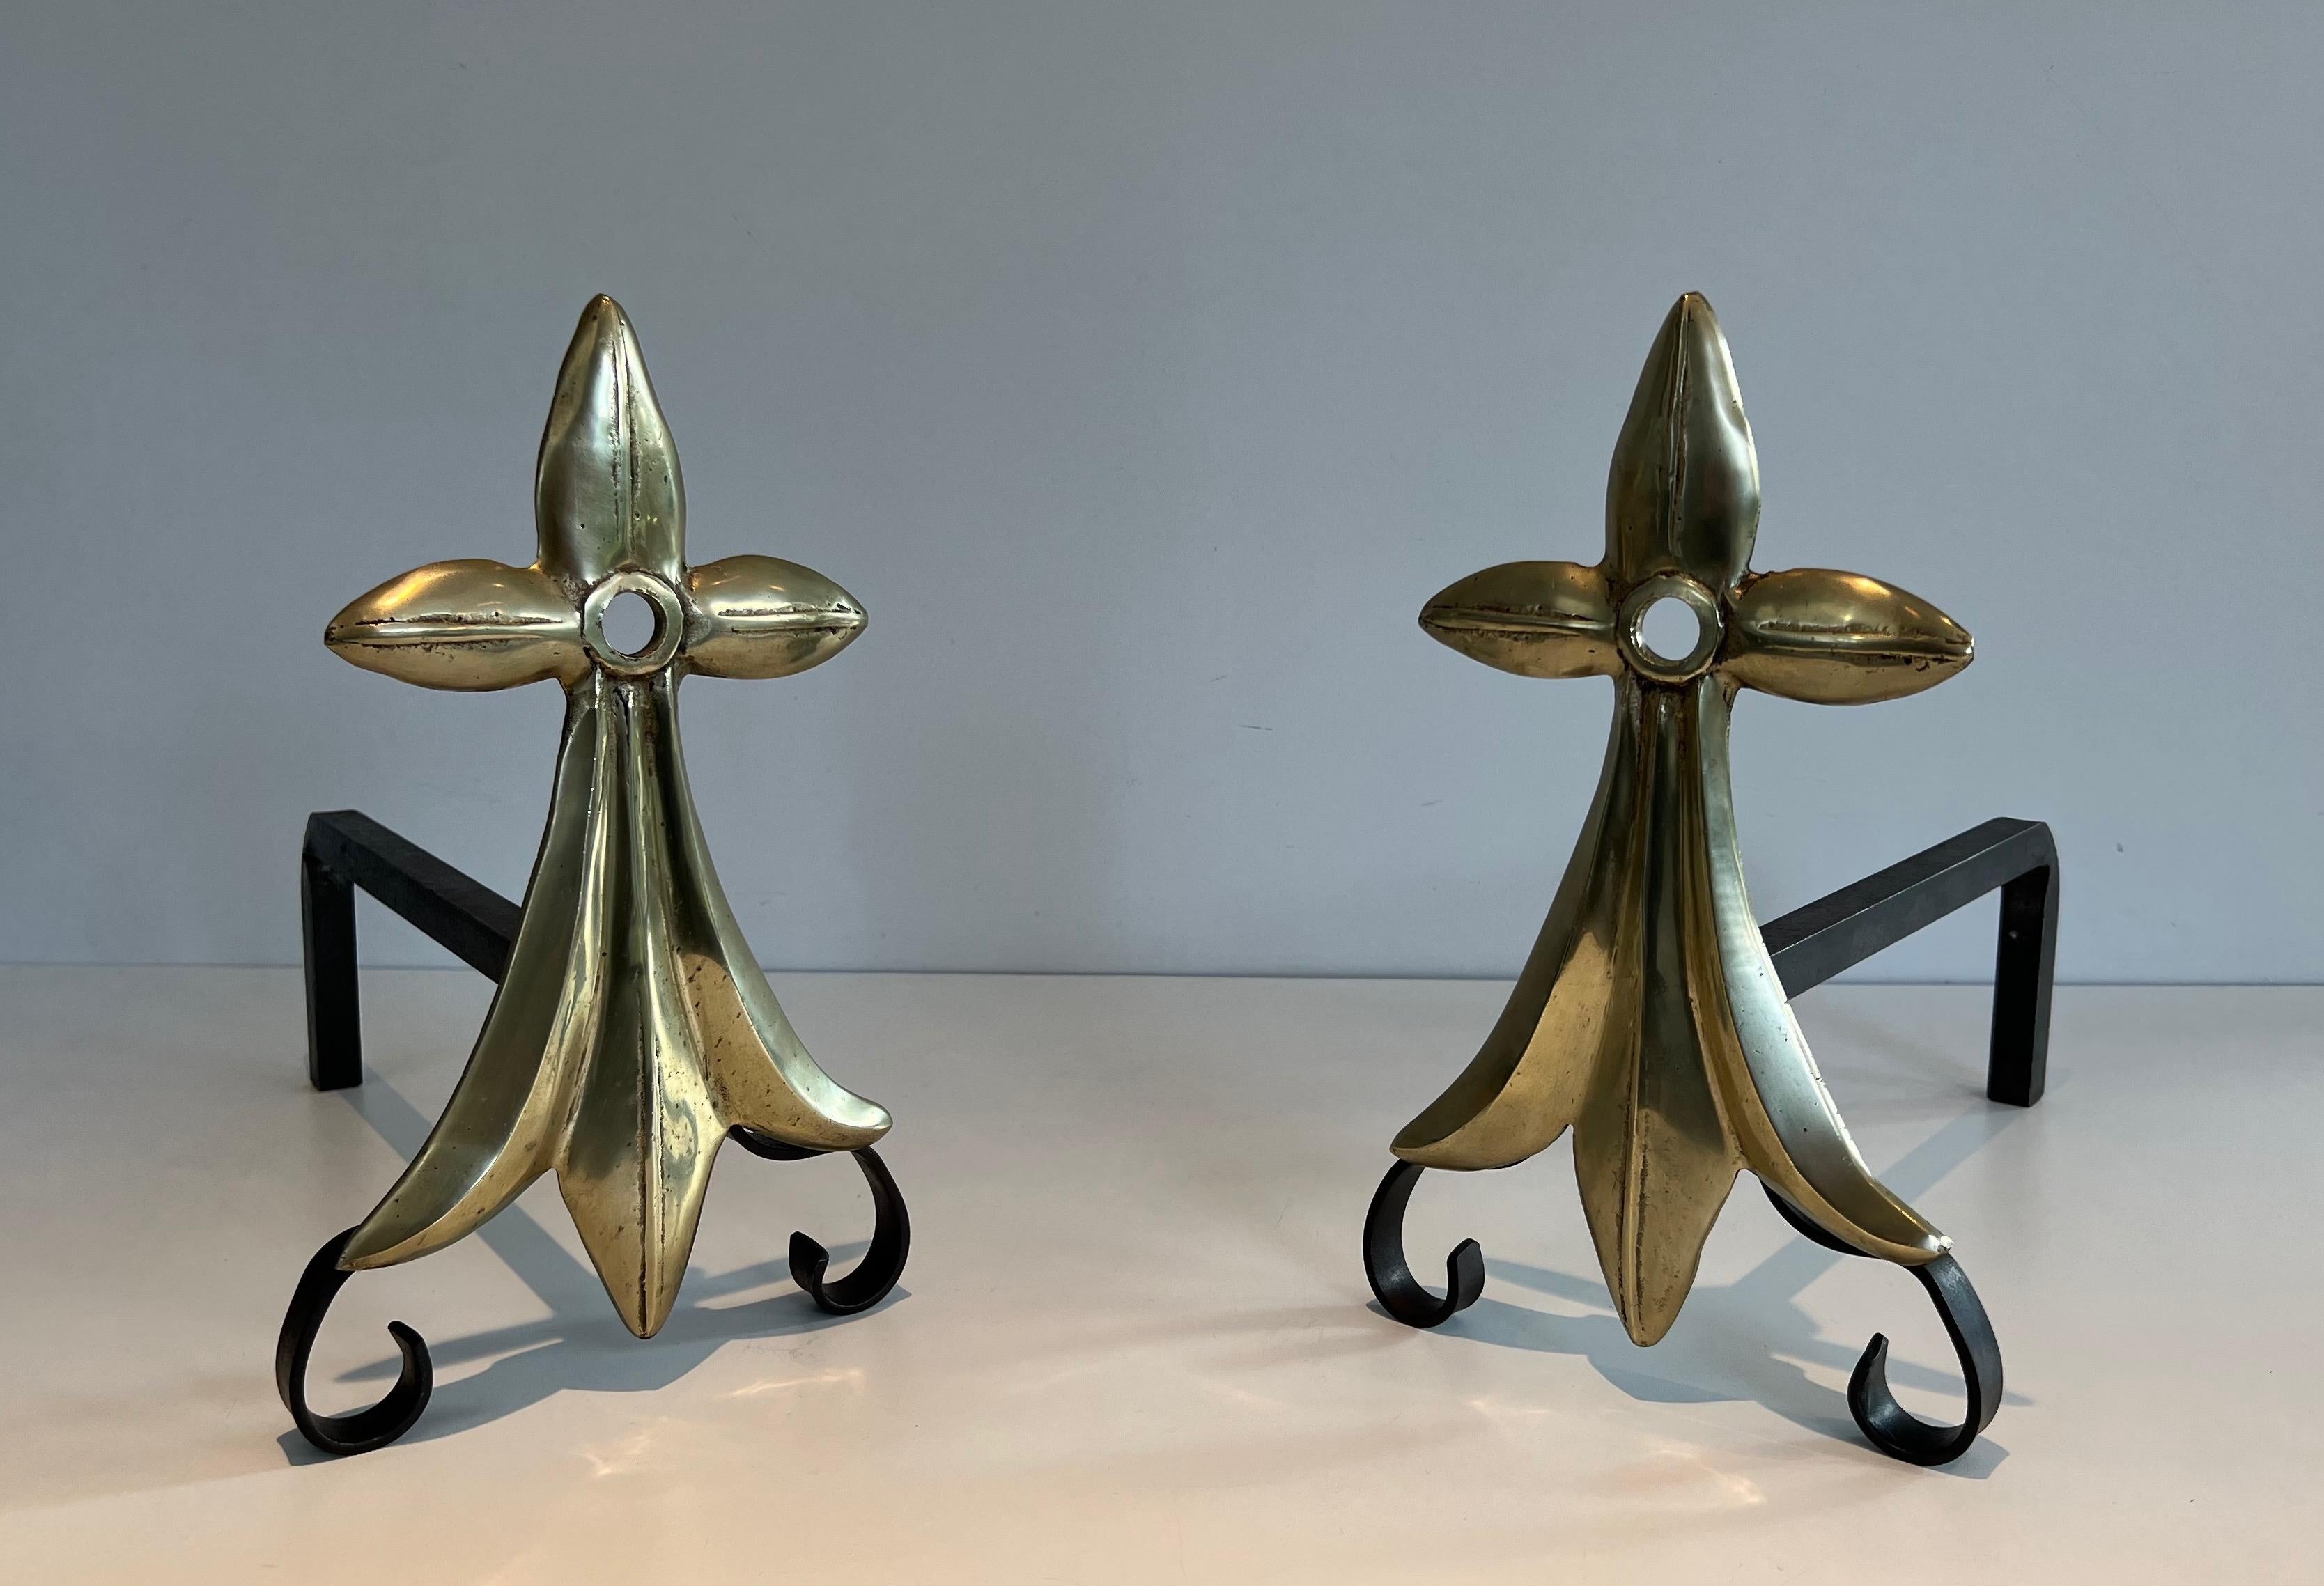 This pair of Art & Crafts ermine tail andirons is made of bronze and wrought iron. This is a French work maked MR with the image of an ermine tail. Circa 1900.